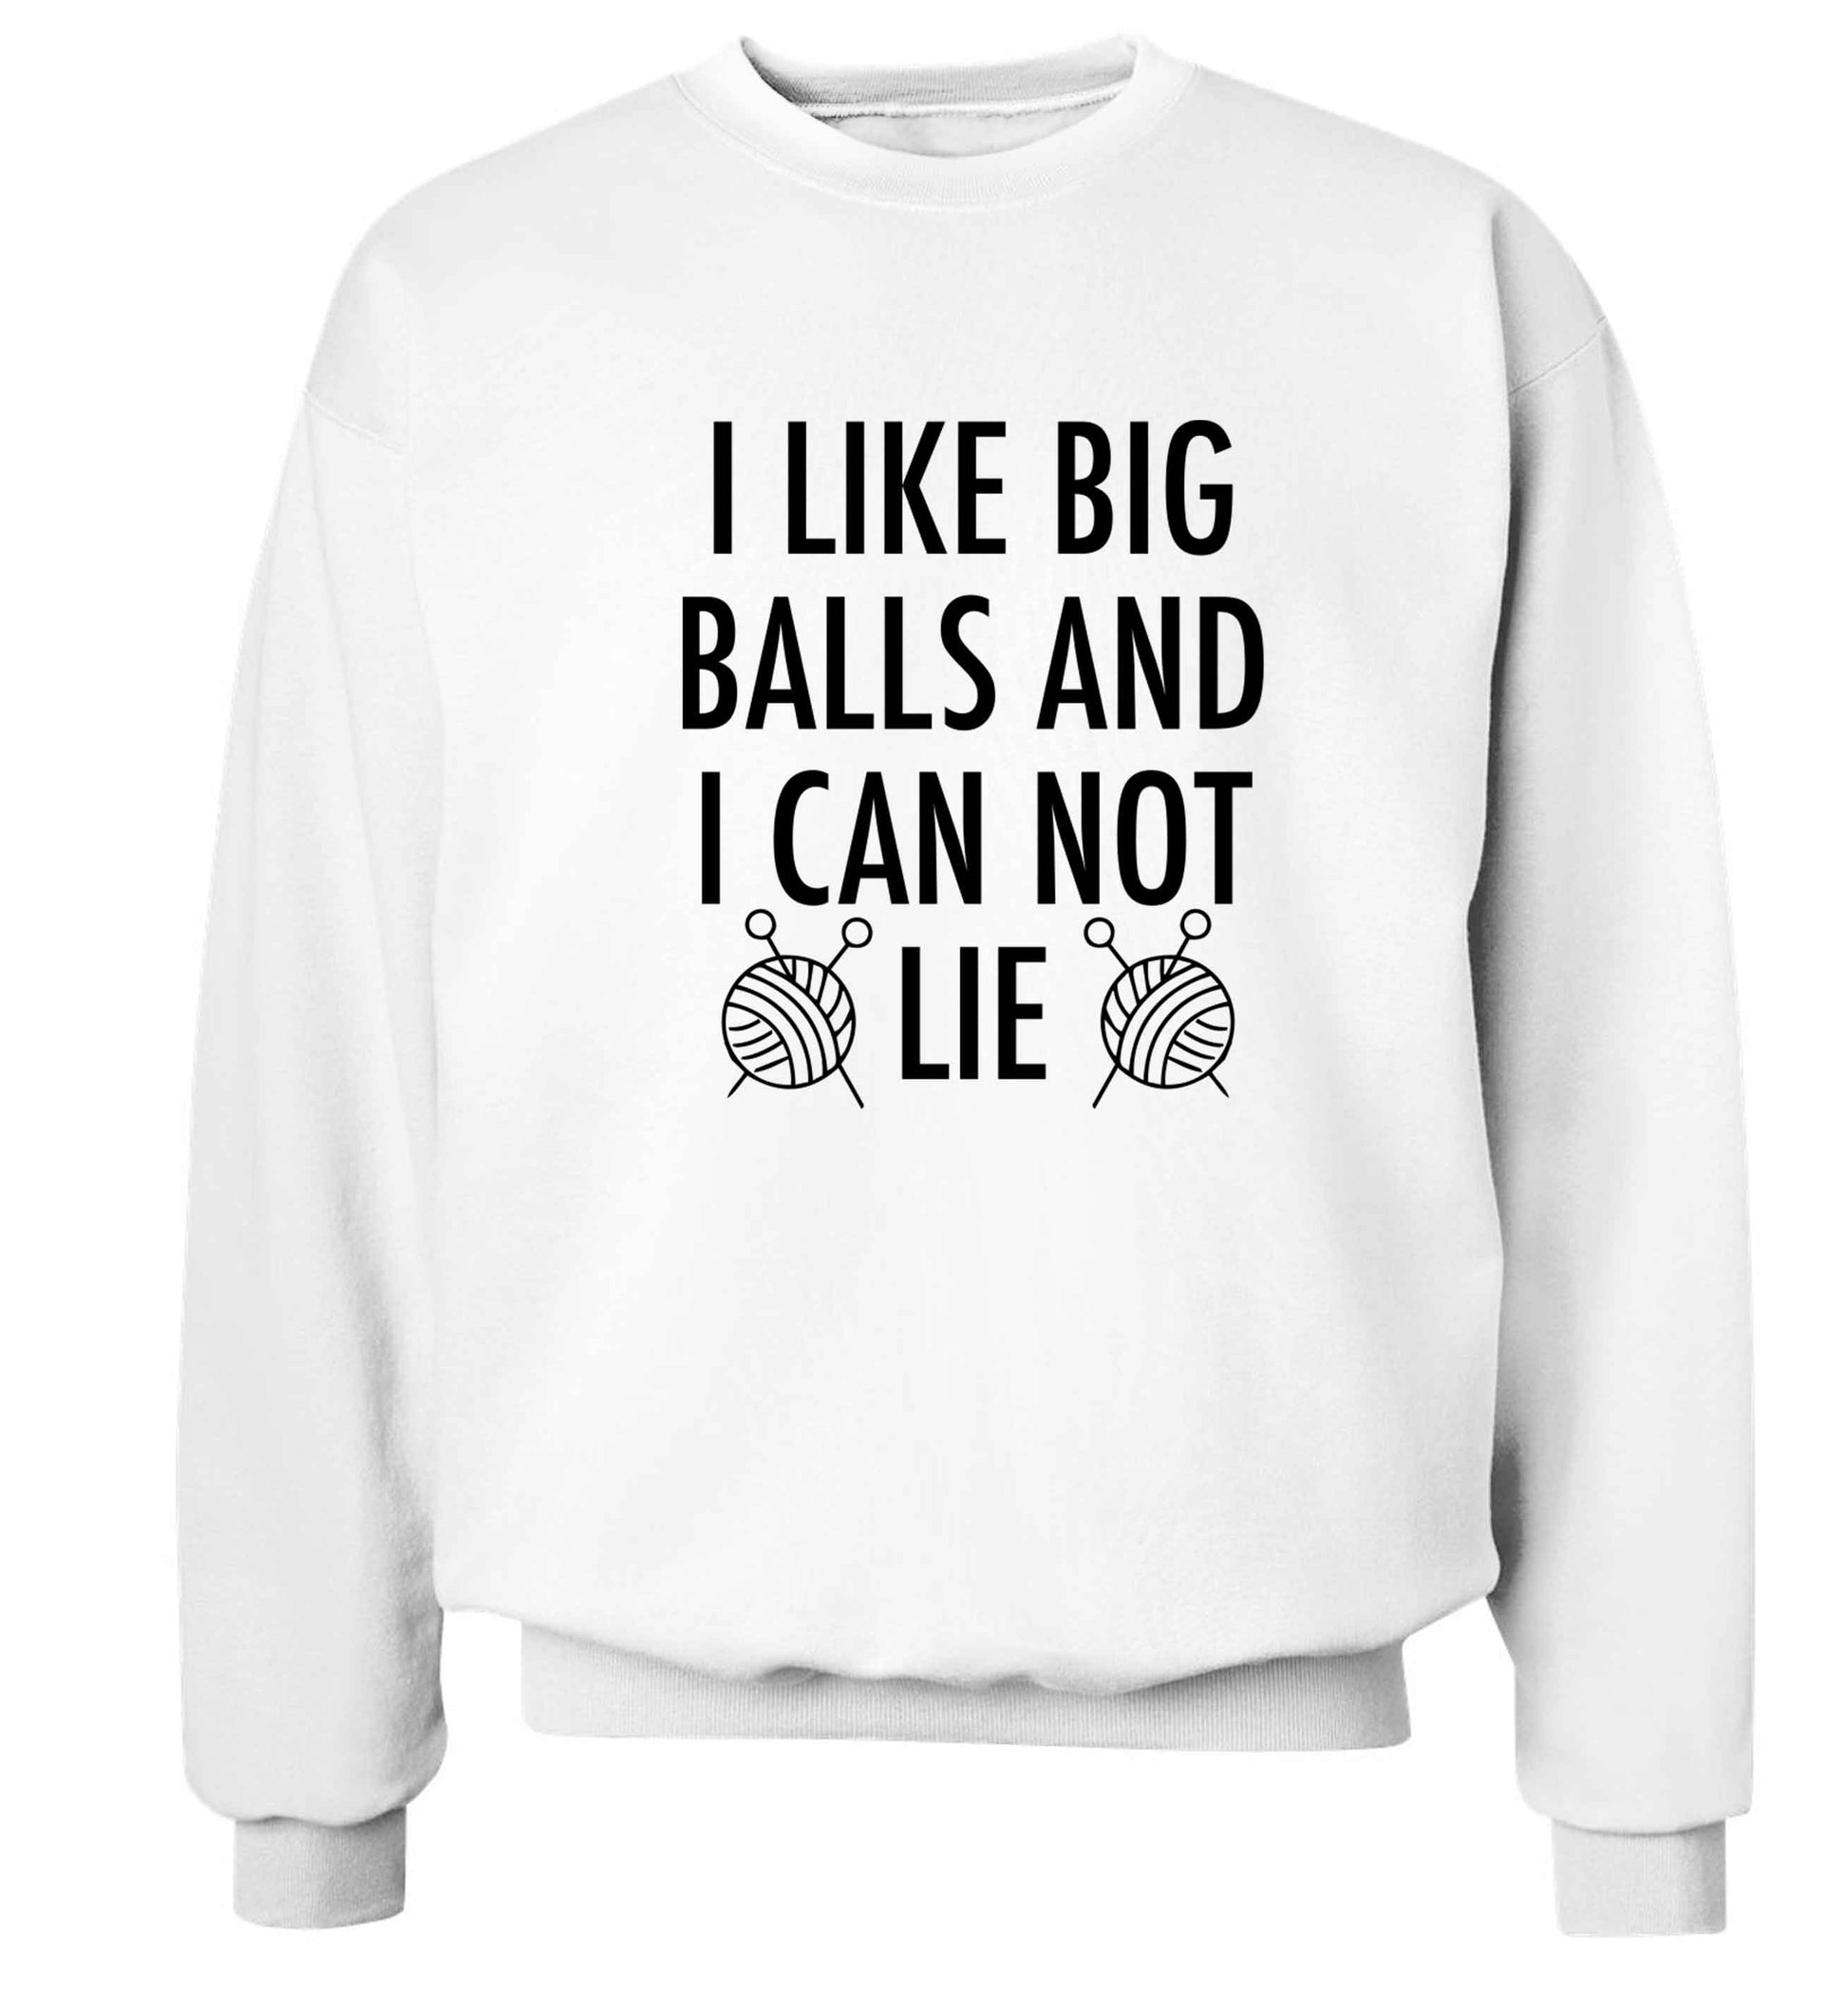 I like big balls and I can not lie Adult's unisex white Sweater 2XL